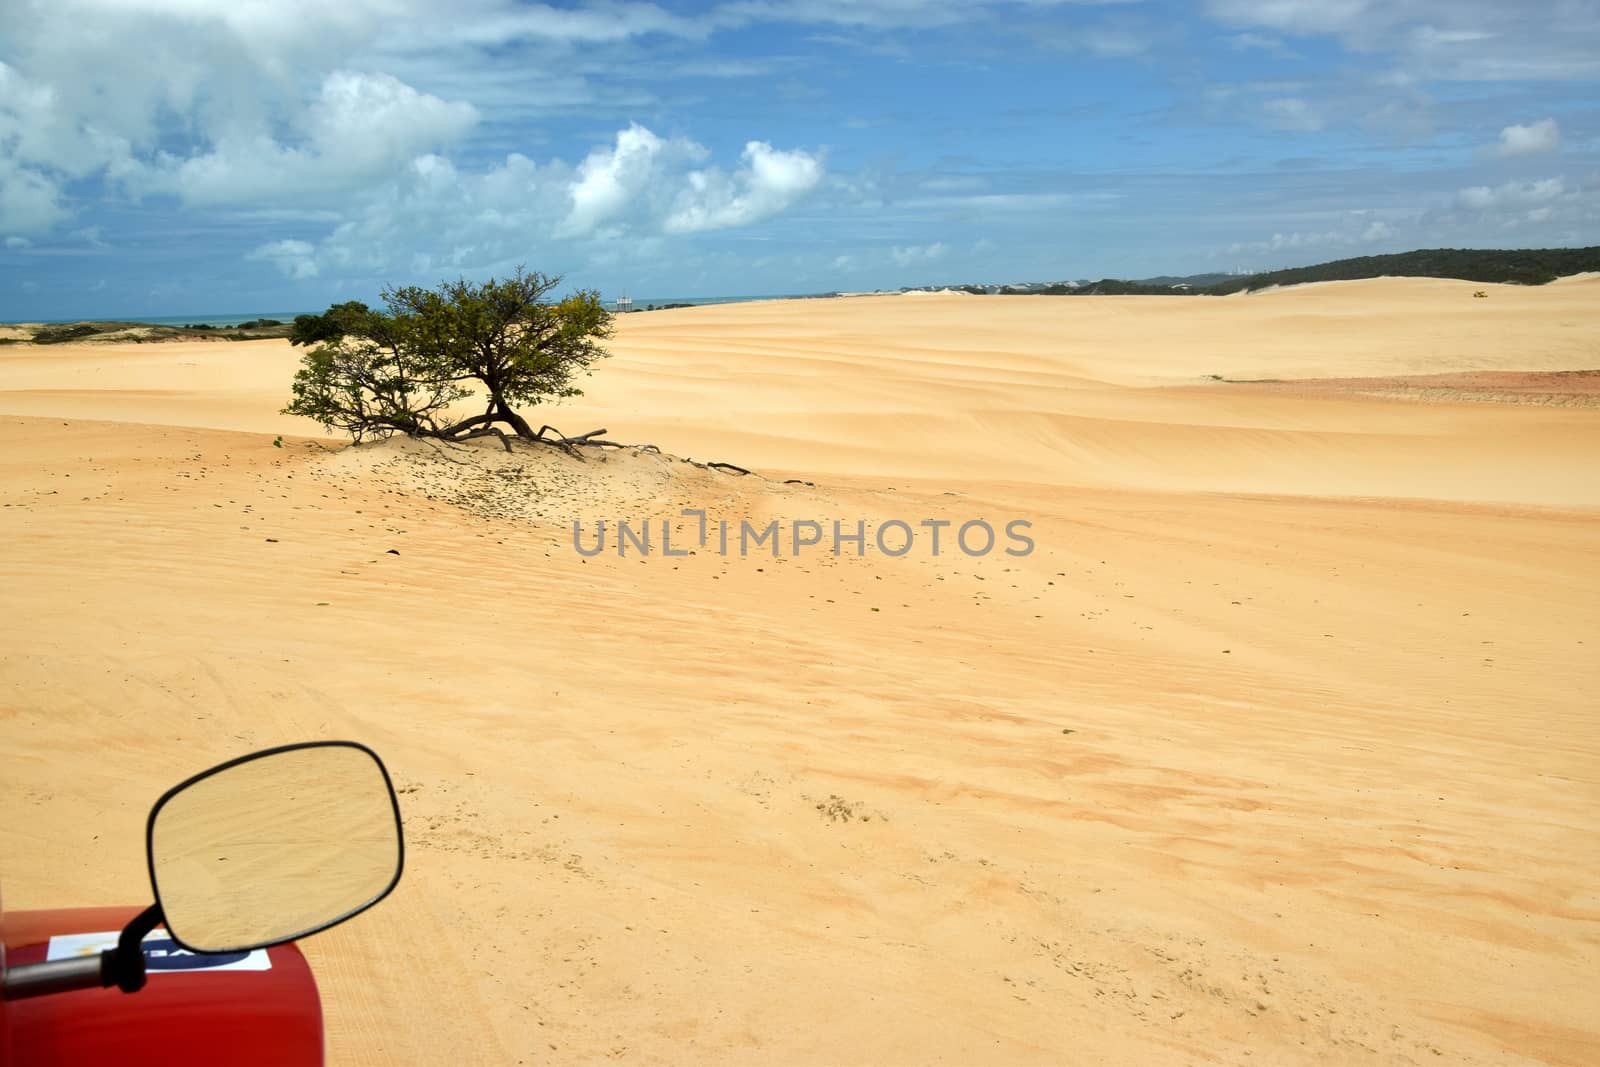 Dune seen from the buggy mirror